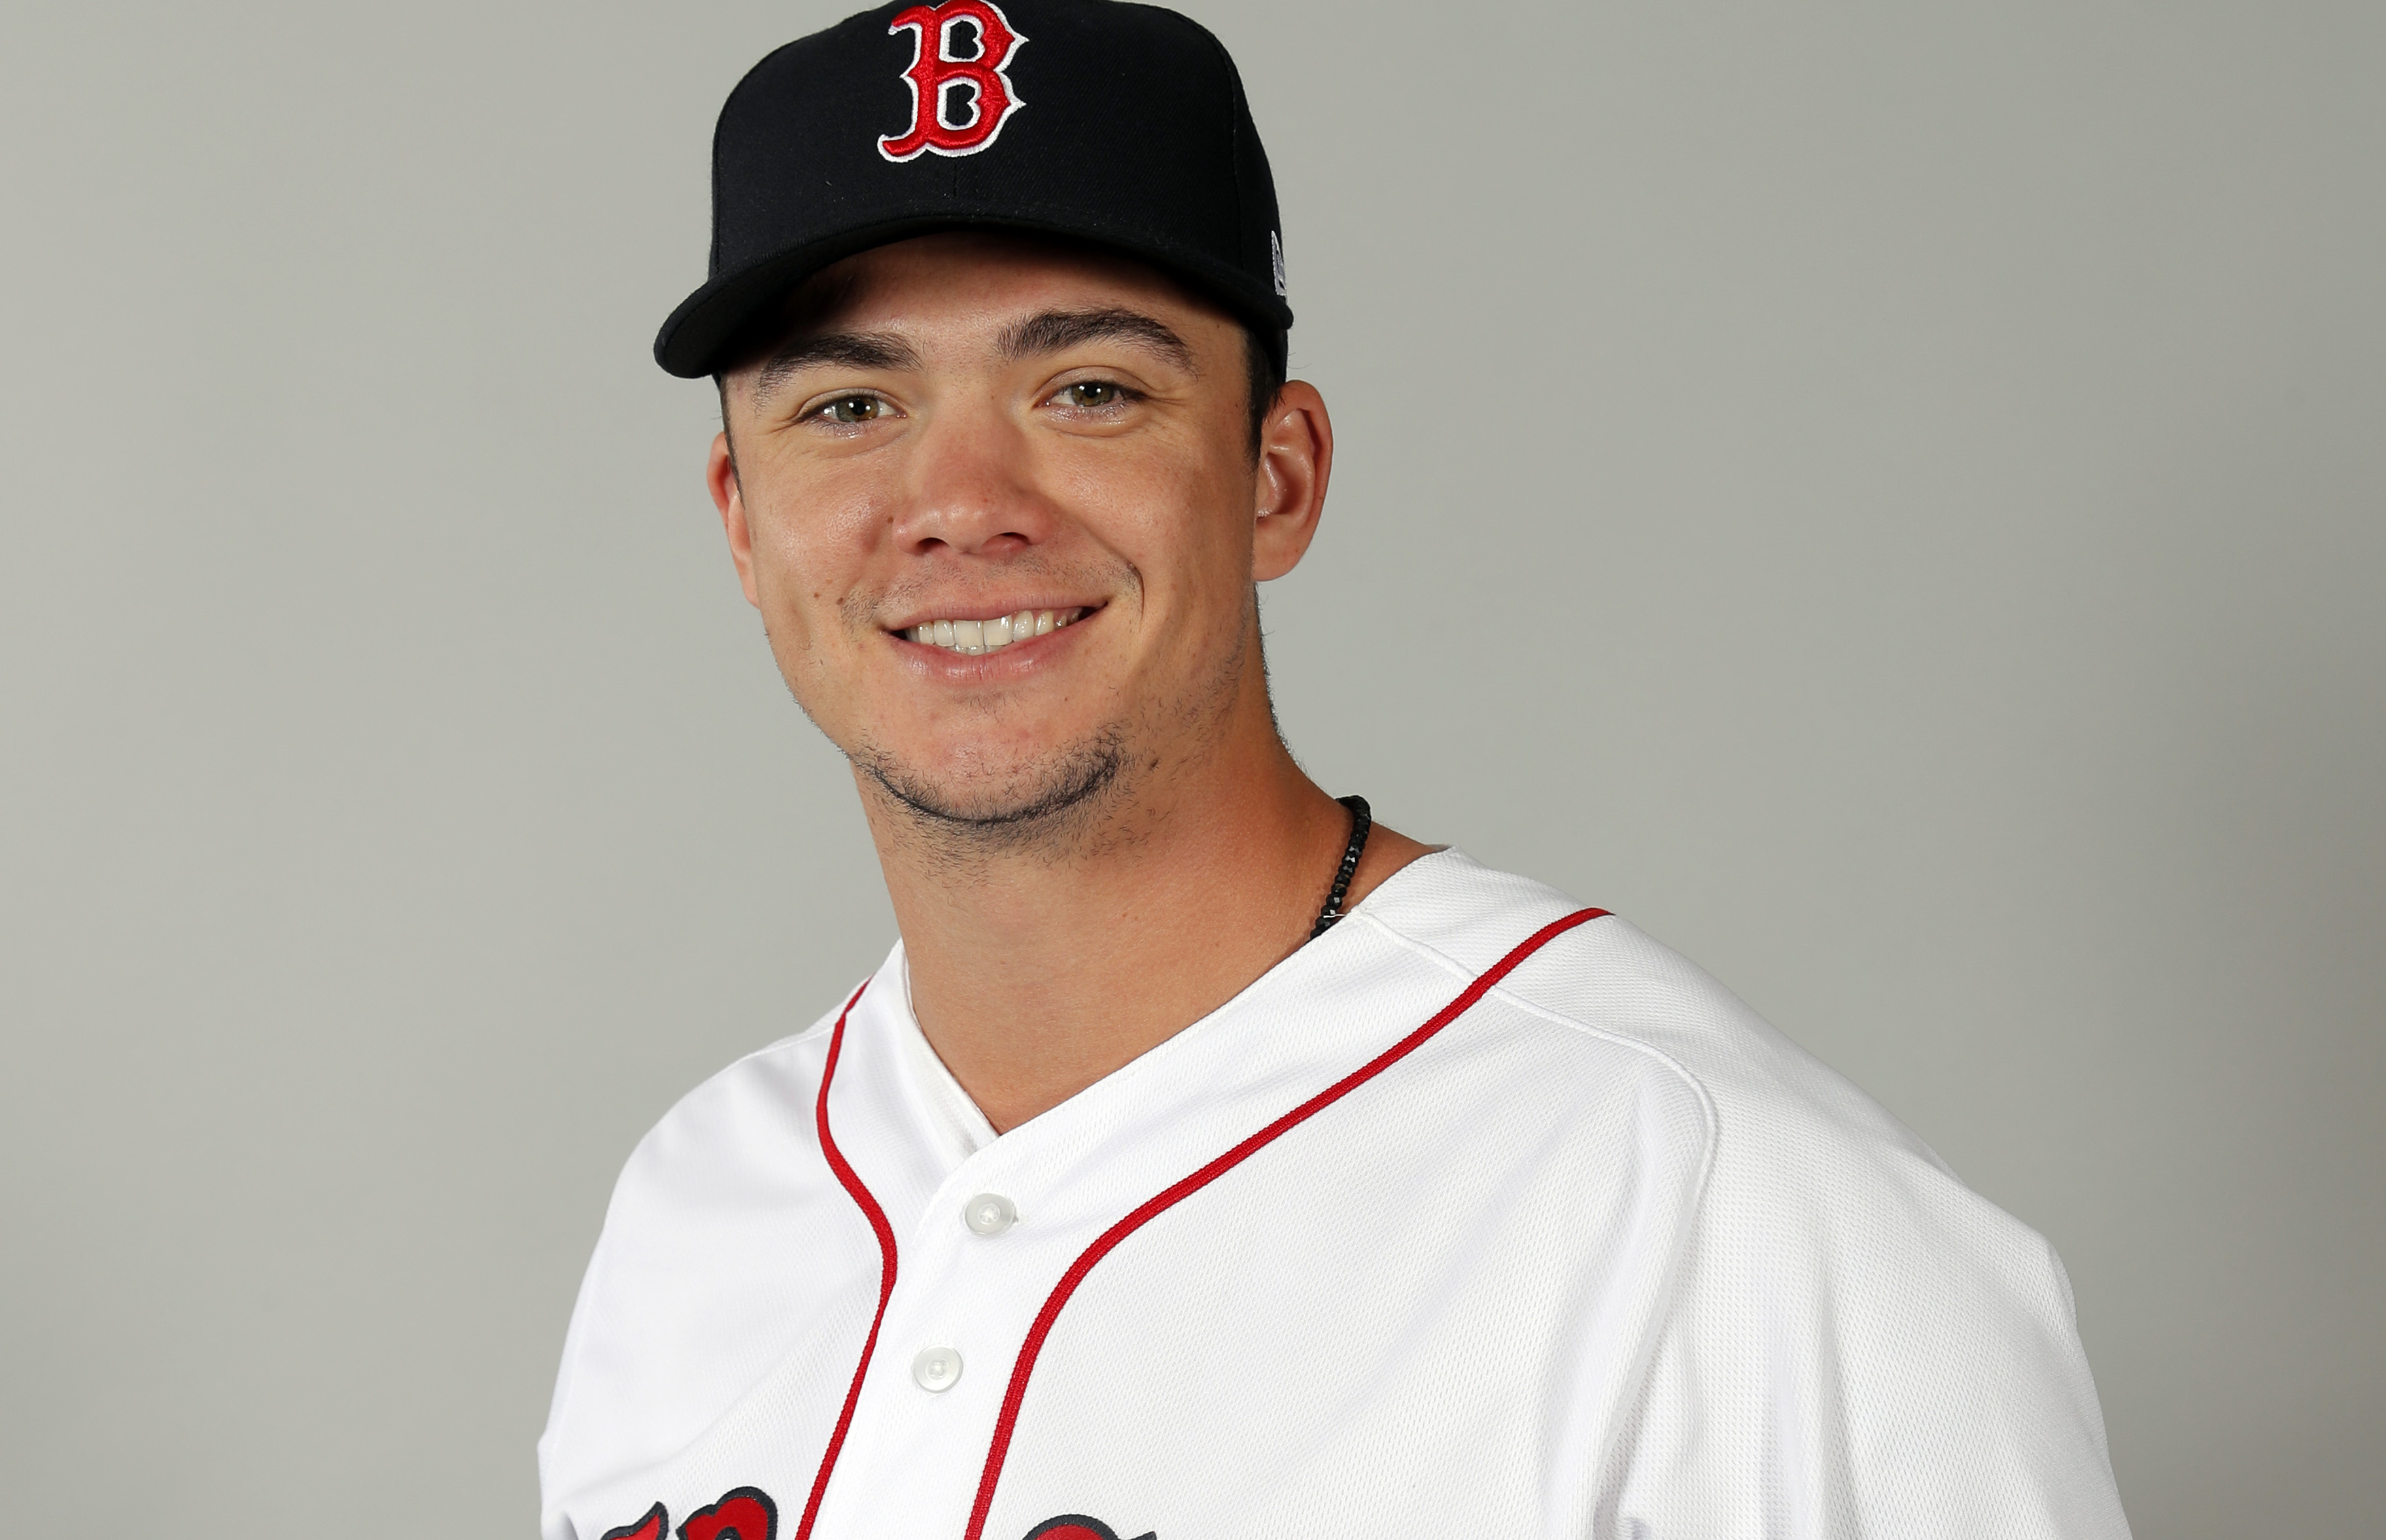 Boston Red Sox - Congratulations to Bobby Dalbec on being named